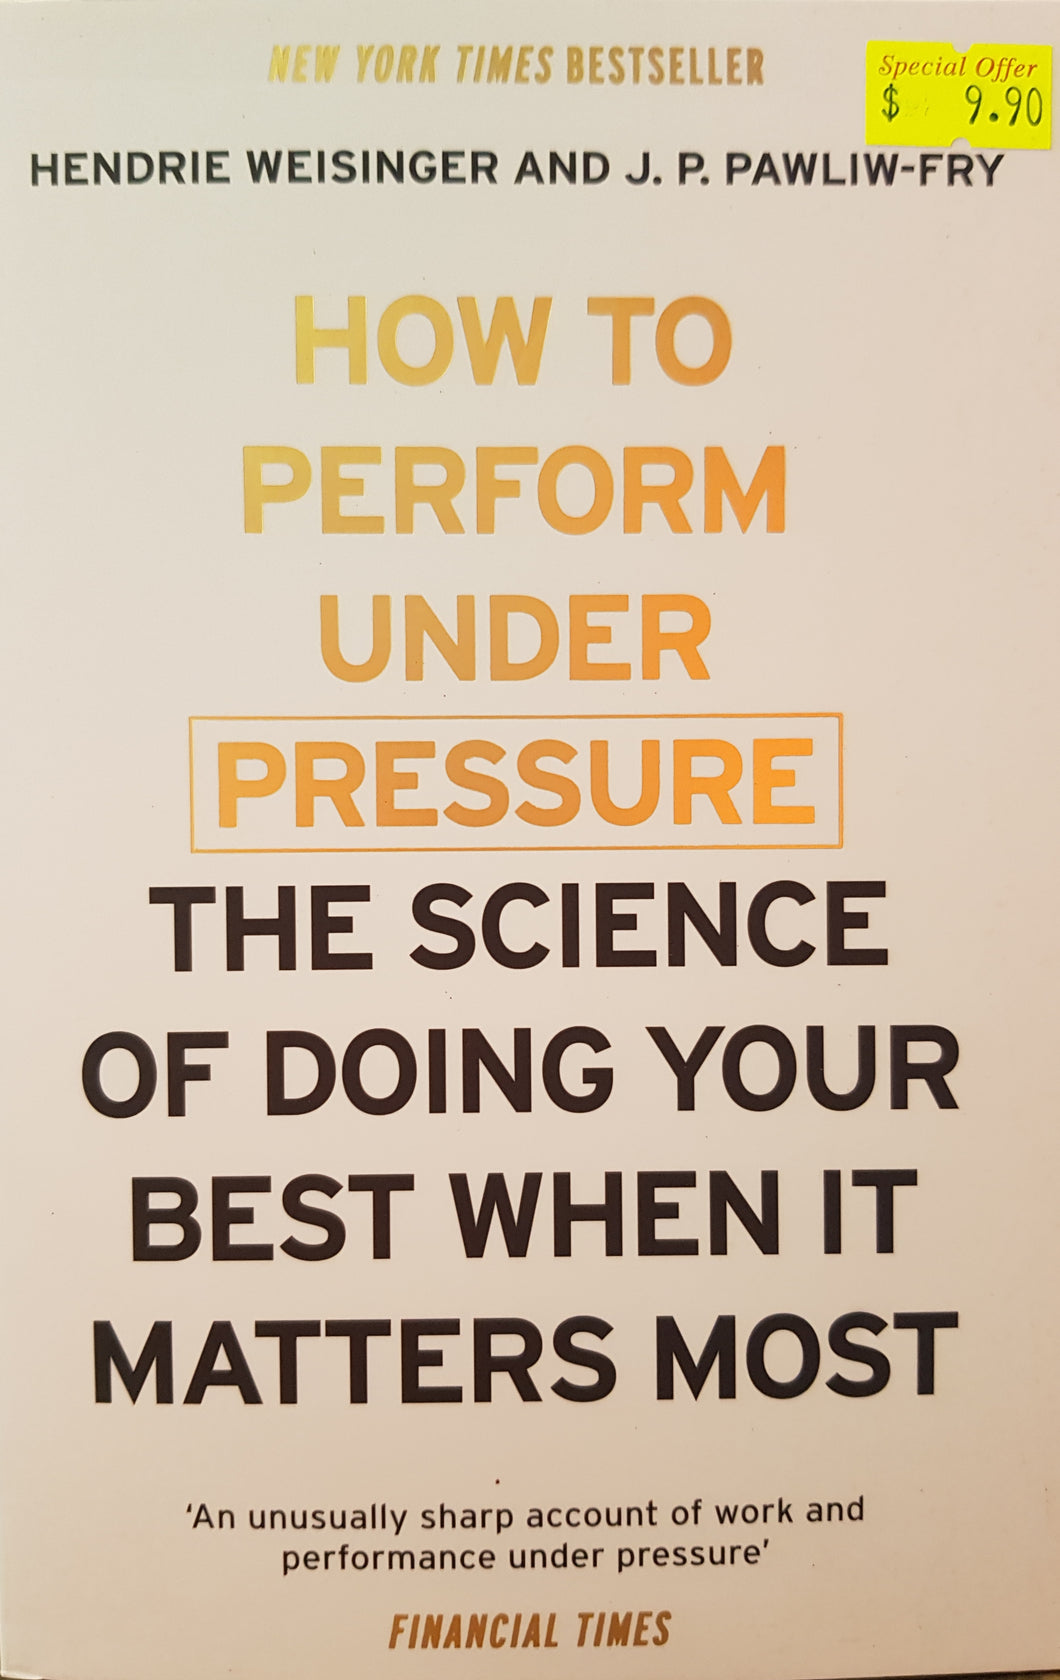 How to Perform Under Pressure: The Science of Doing Your Best When It Matters Most - Hendrie Weisinger & J. P. Pawliw-Fry